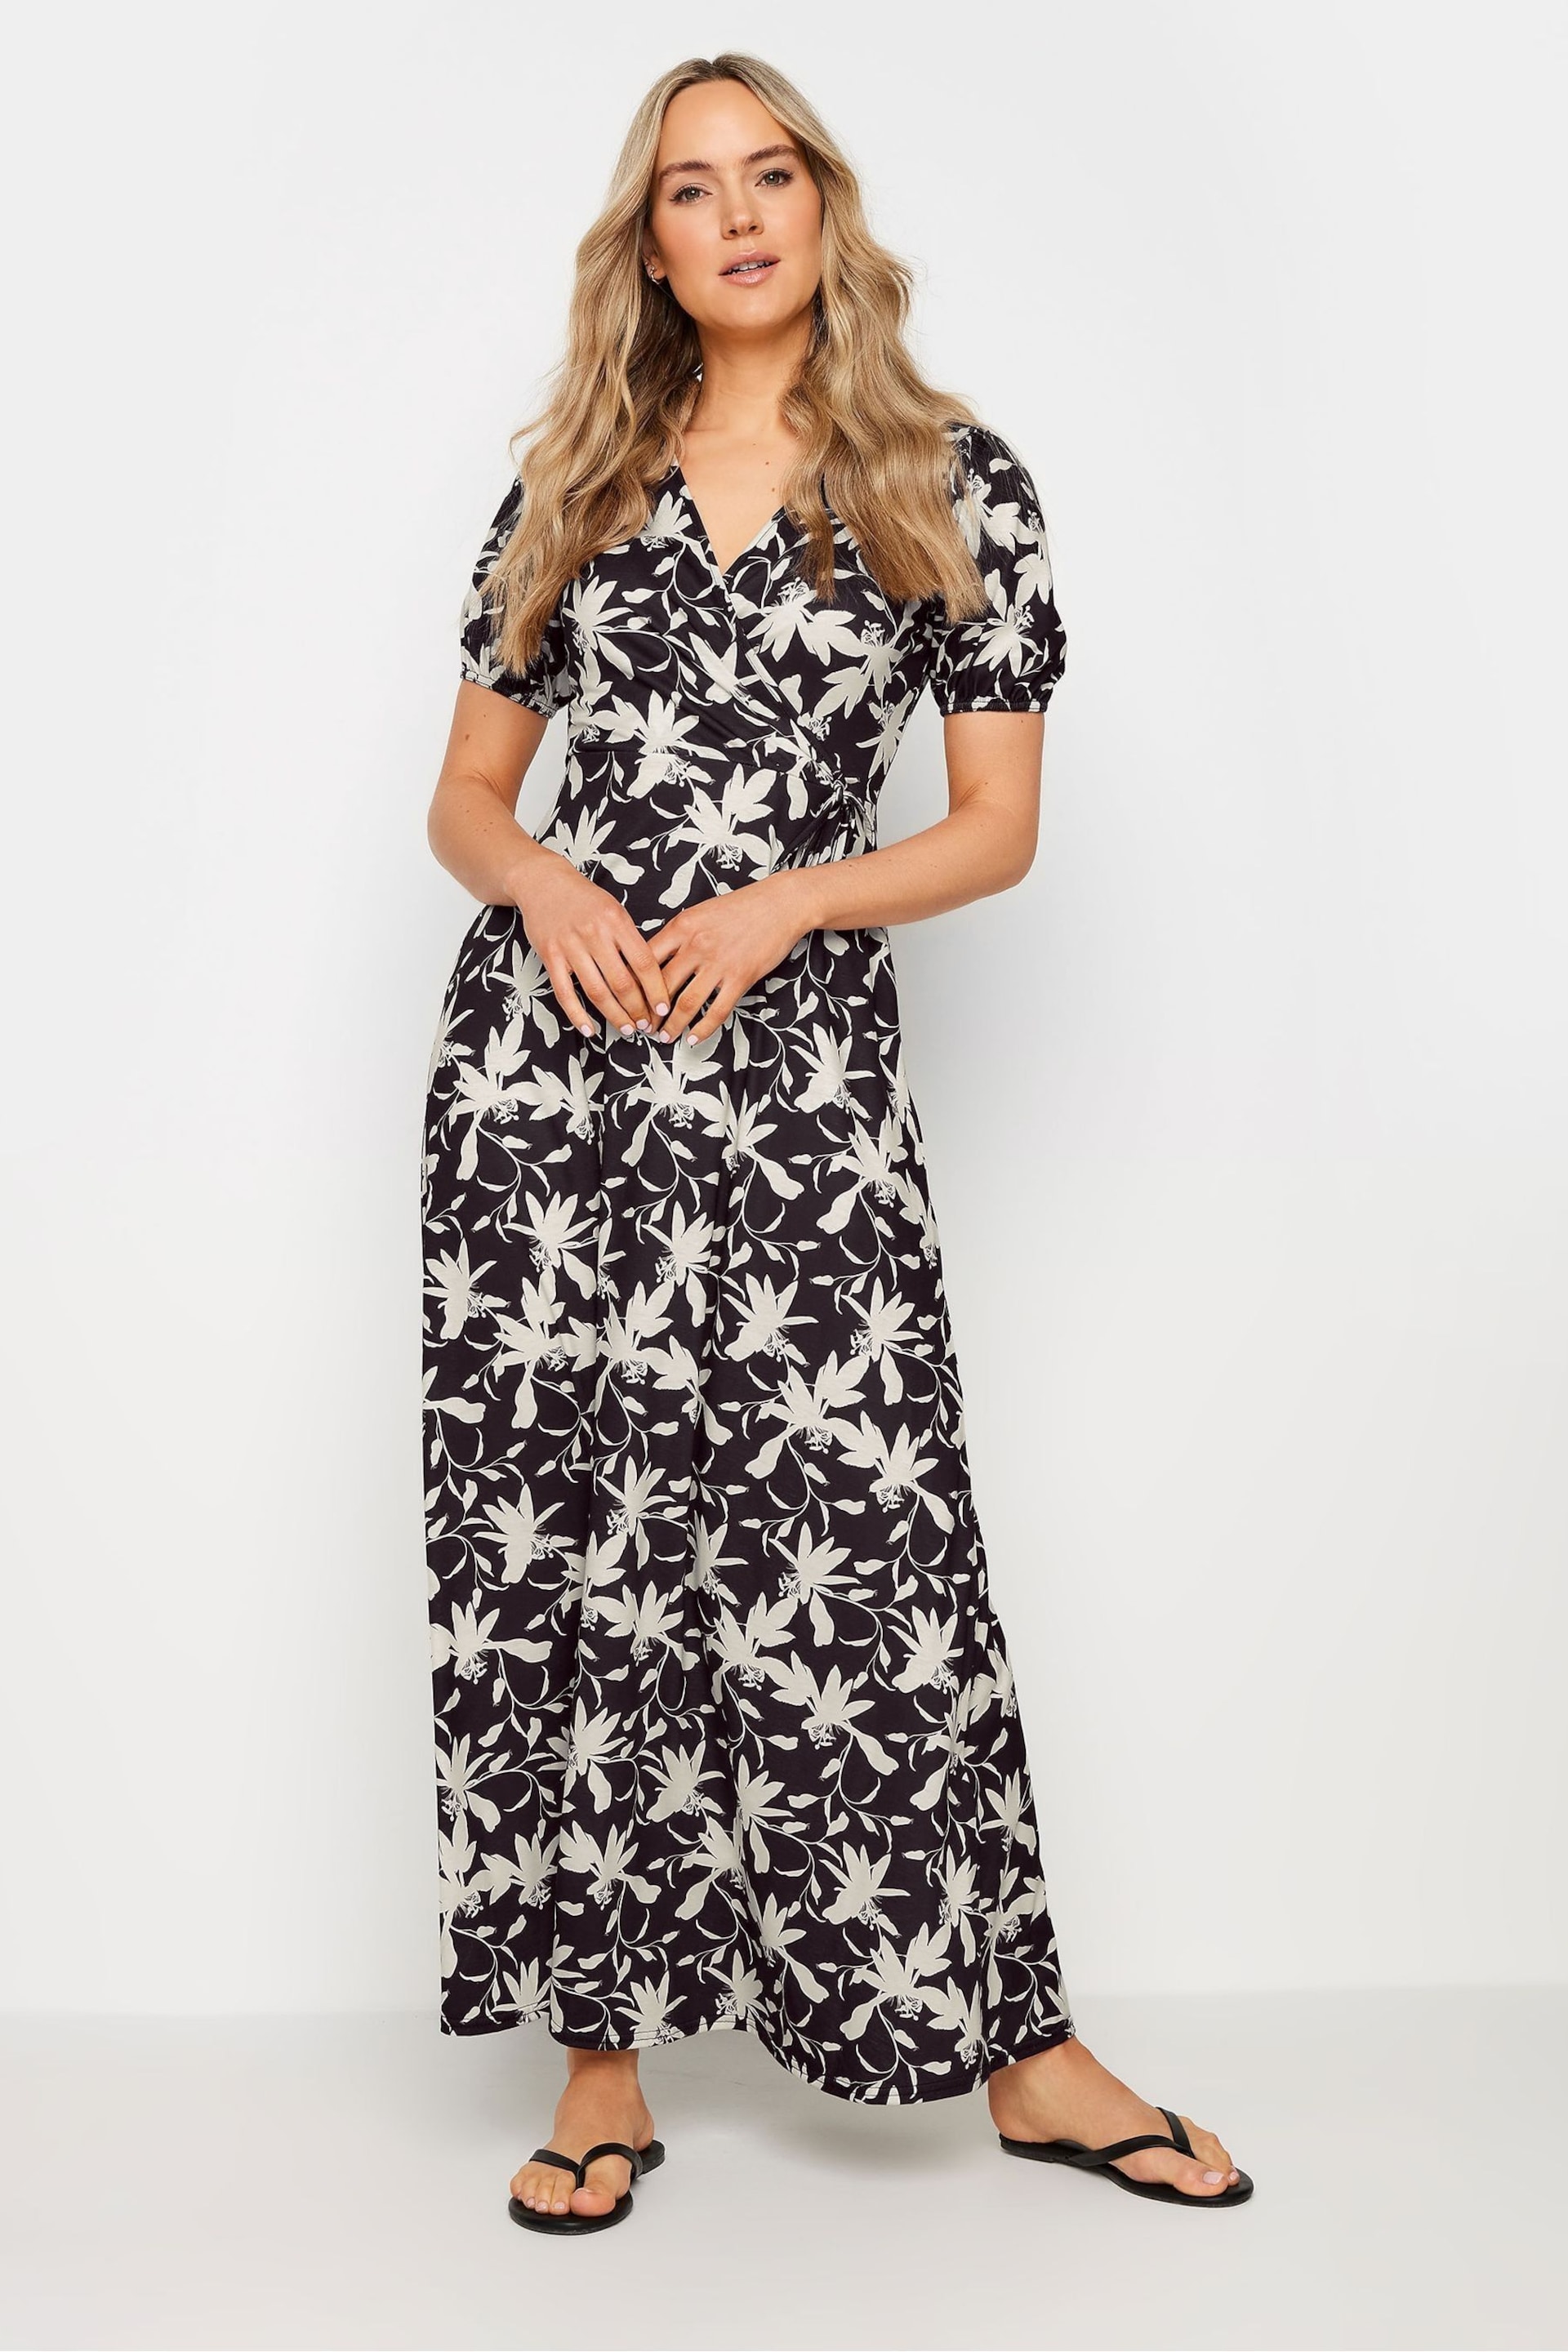 Long Tall Sally Black Floral Wrap Maxi Dress - Image 1 of 5